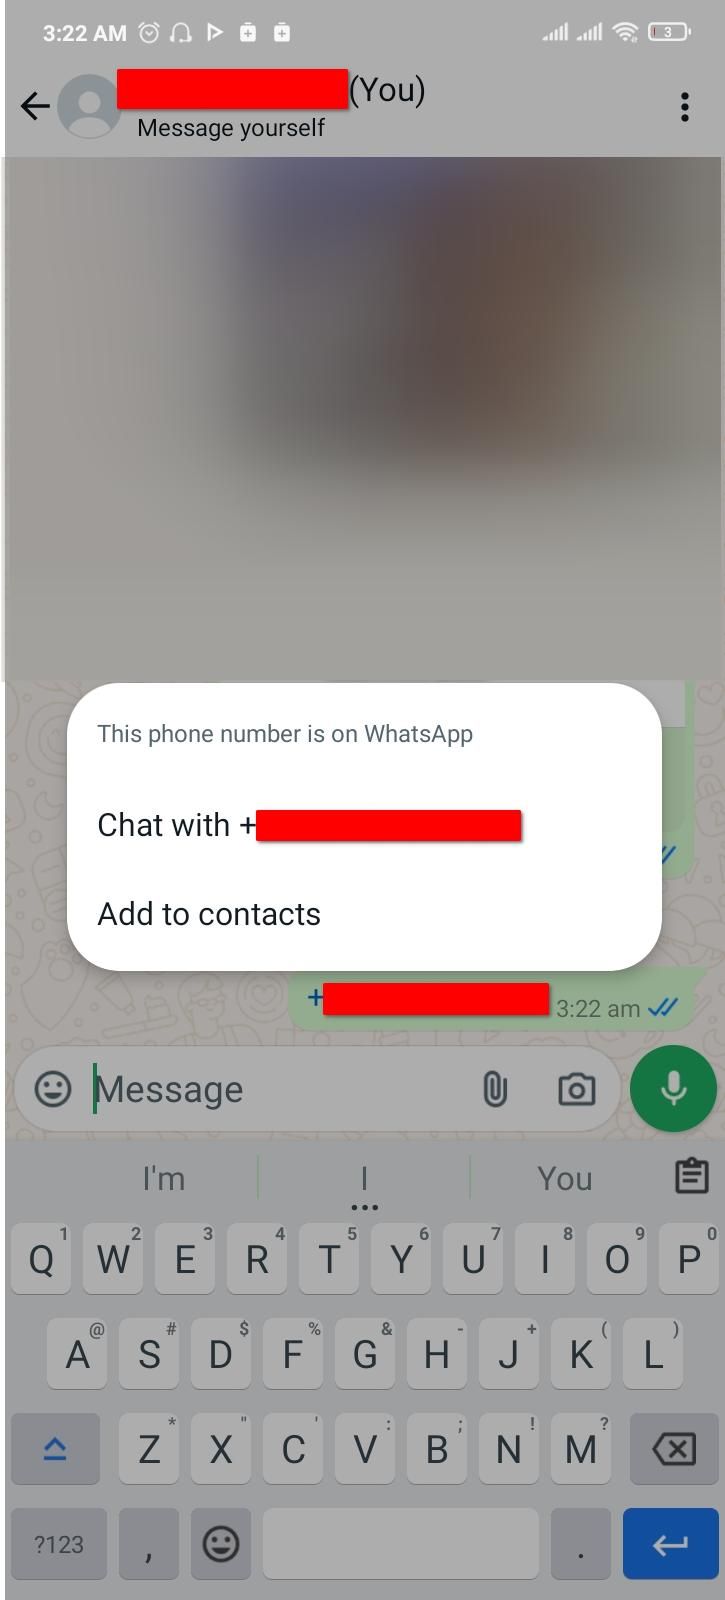 Starting a new WhatsApp chat from an SMS sent to yourself.